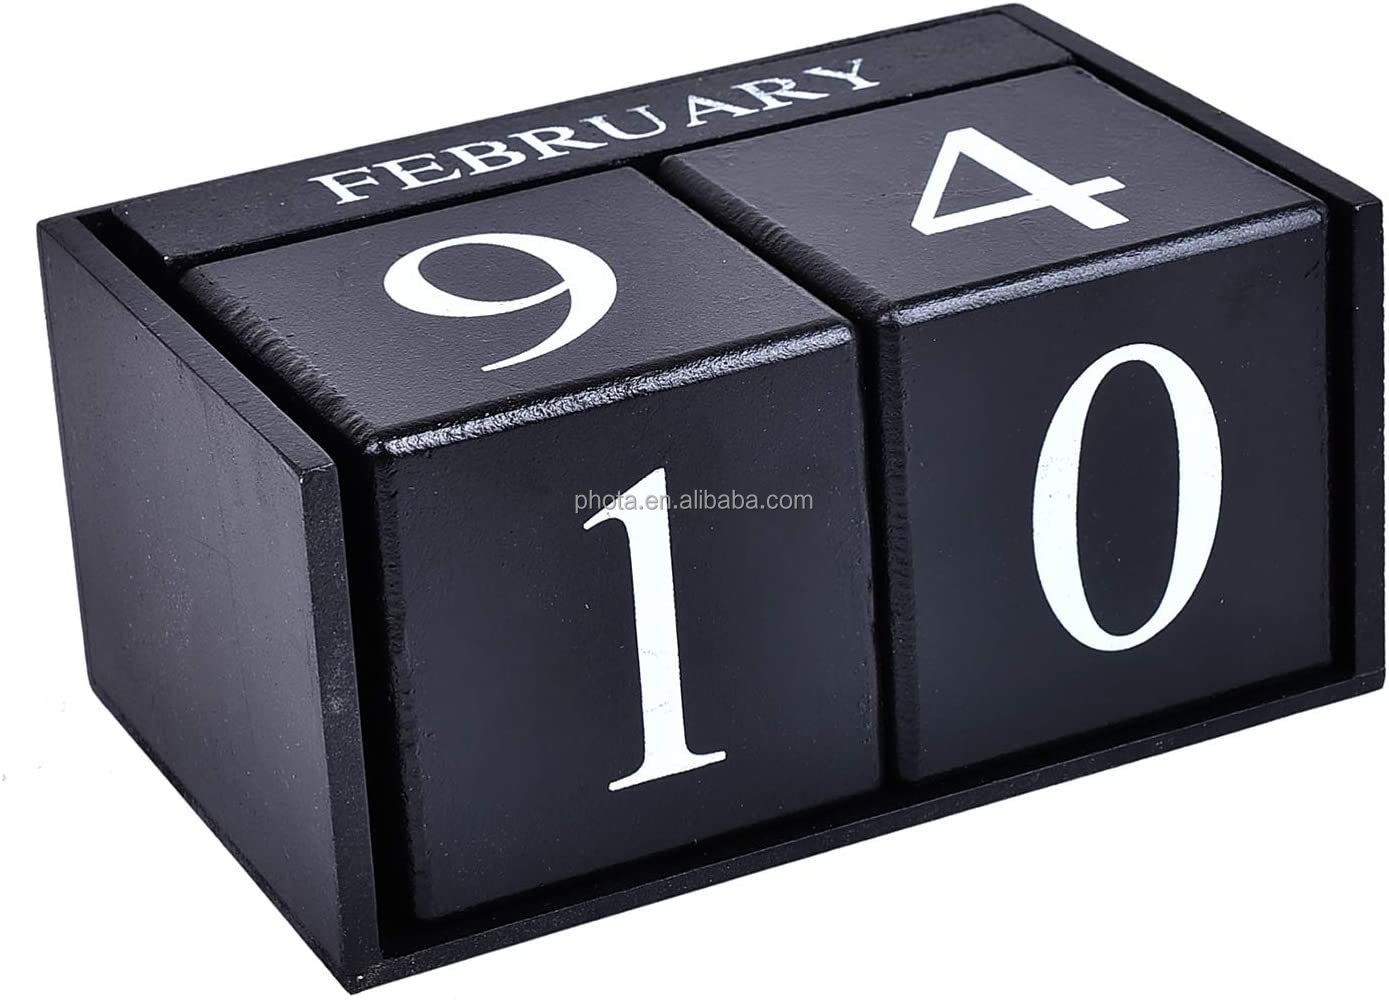 Small Wooden Desk Blocks Calendar - Perpetual Block Month Date Display Home Office Decoration 3.7 x 2.1 x 1.7 inches